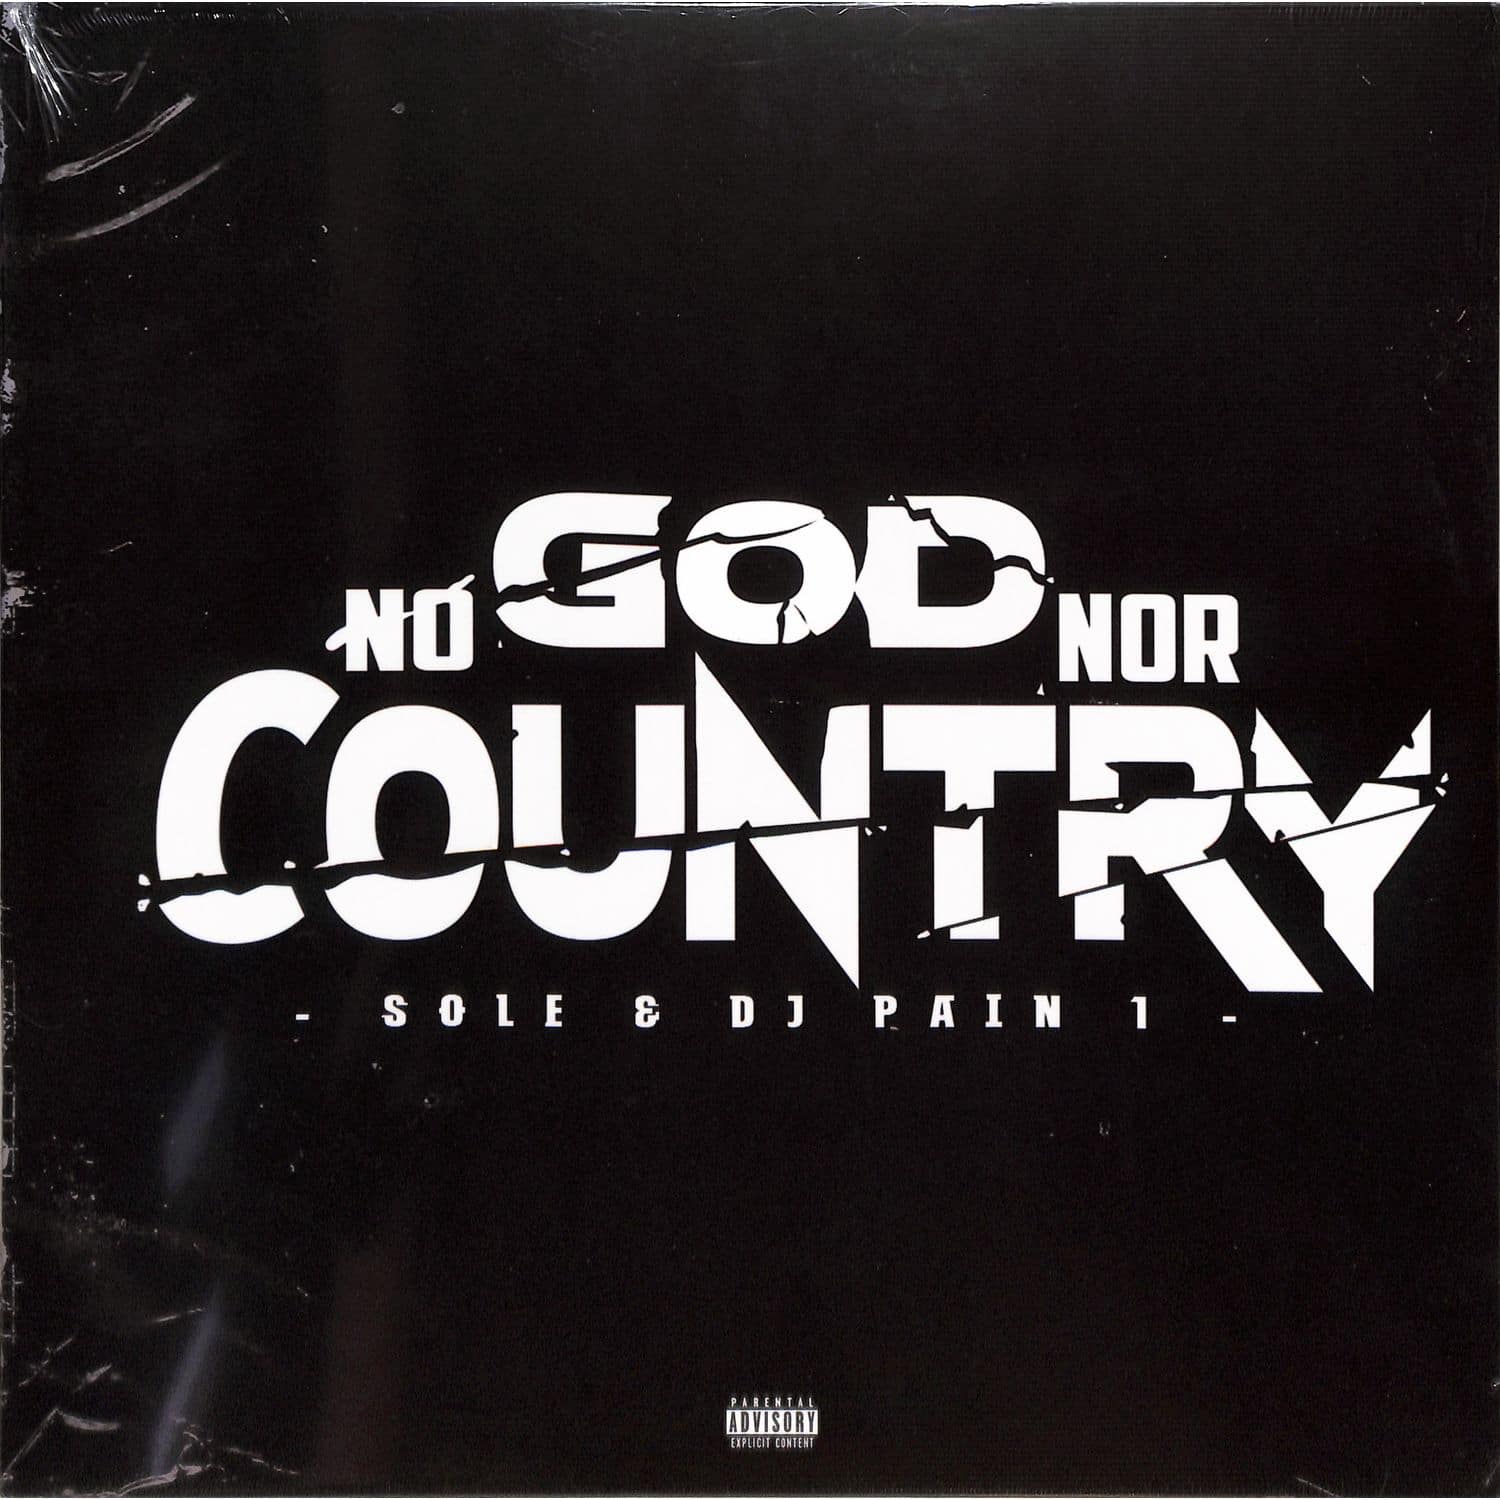 Sole & DJ Pain 1 - NO GOD NOR COUNTRY 